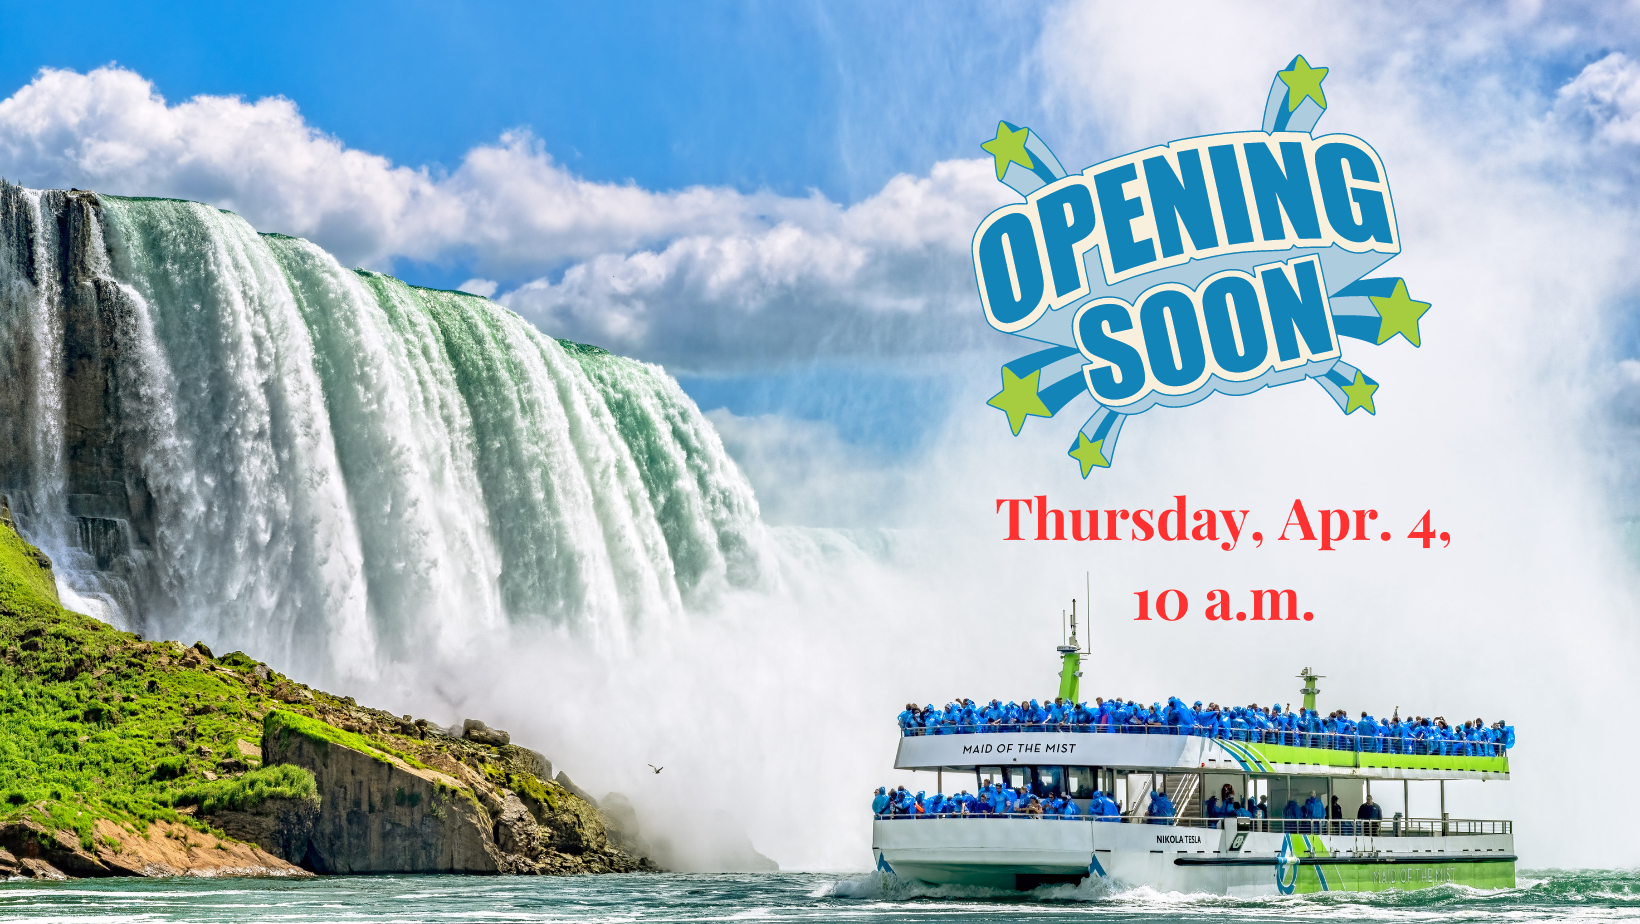 http://Maid-of-the-Mist-Opening-Soon